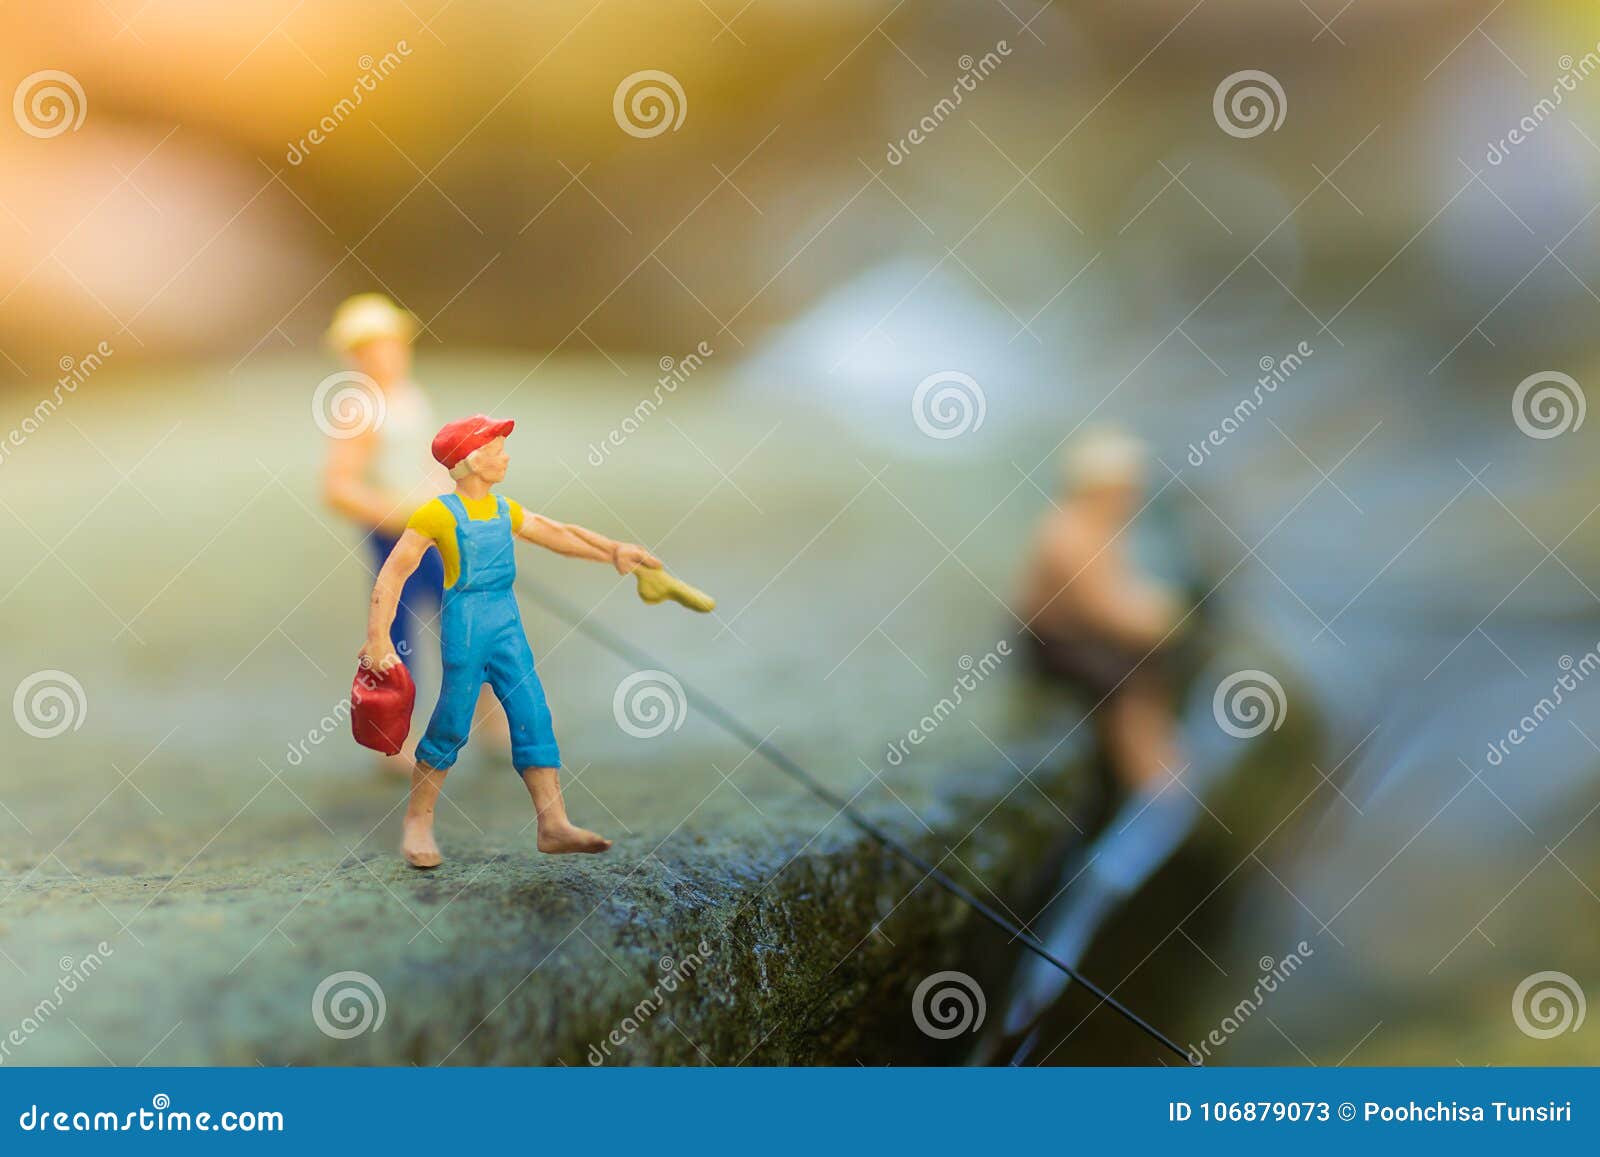 363 Miniature Fisherman Stock Photos - Free & Royalty-Free Stock Photos  from Dreamstime